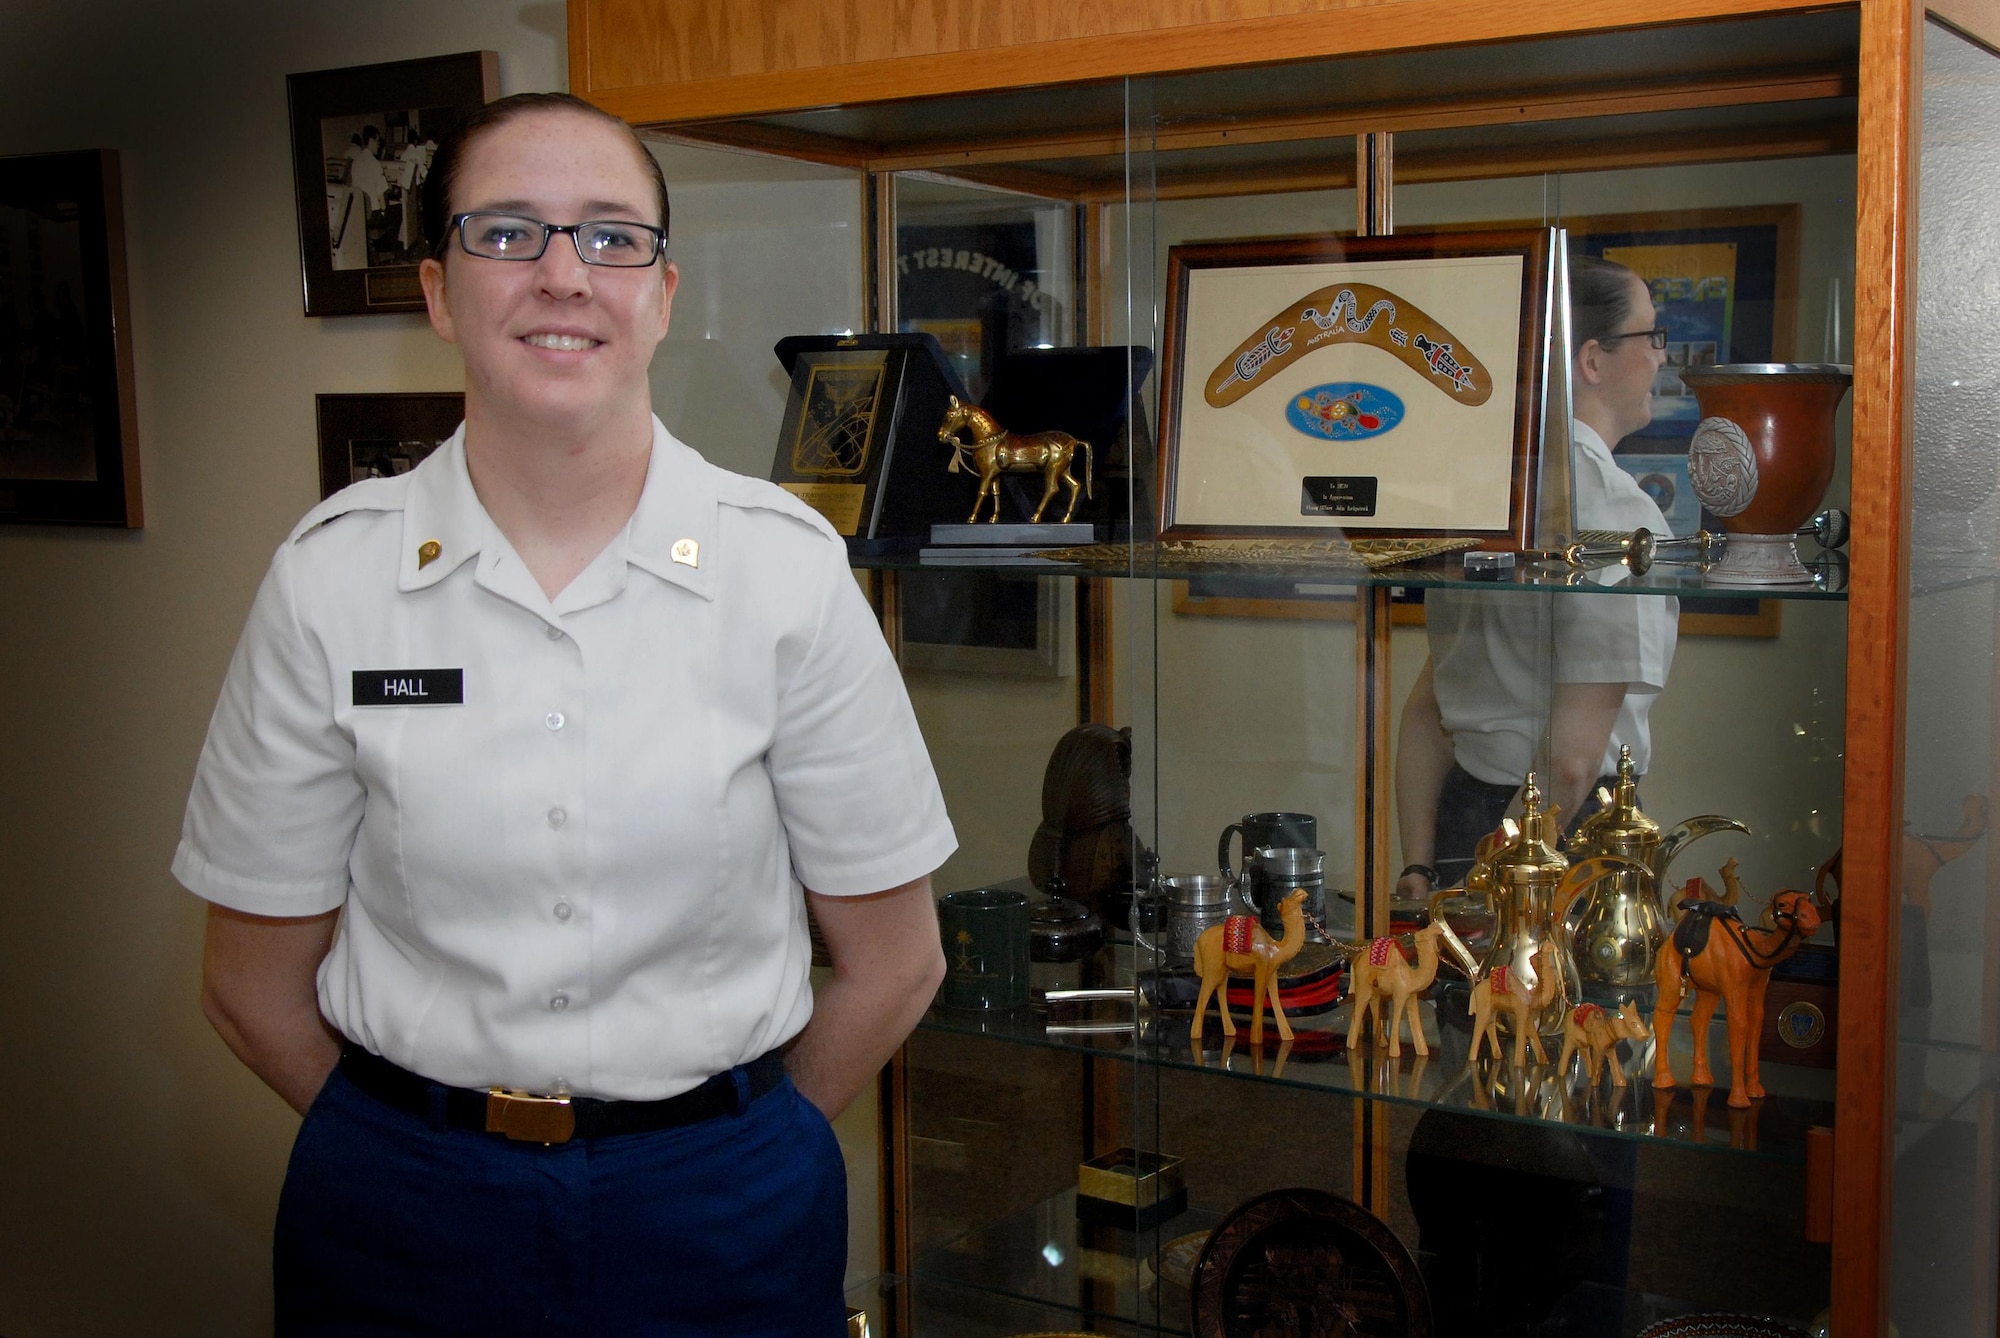 U.S. Army Spc. Ashley E. Hall, 316th Training Squadron student, poses for a photo on in Brandenberg Hall on Goodfellow Air Force Base, Texas, Aug. 7, 2015. Hall is the 17th Training Group July Student of the Month Spotlight, a series highlighting Team Goodfellow students. (U.S. Air Force photo by Senior 
Airman Joshua Edwards/Released)
